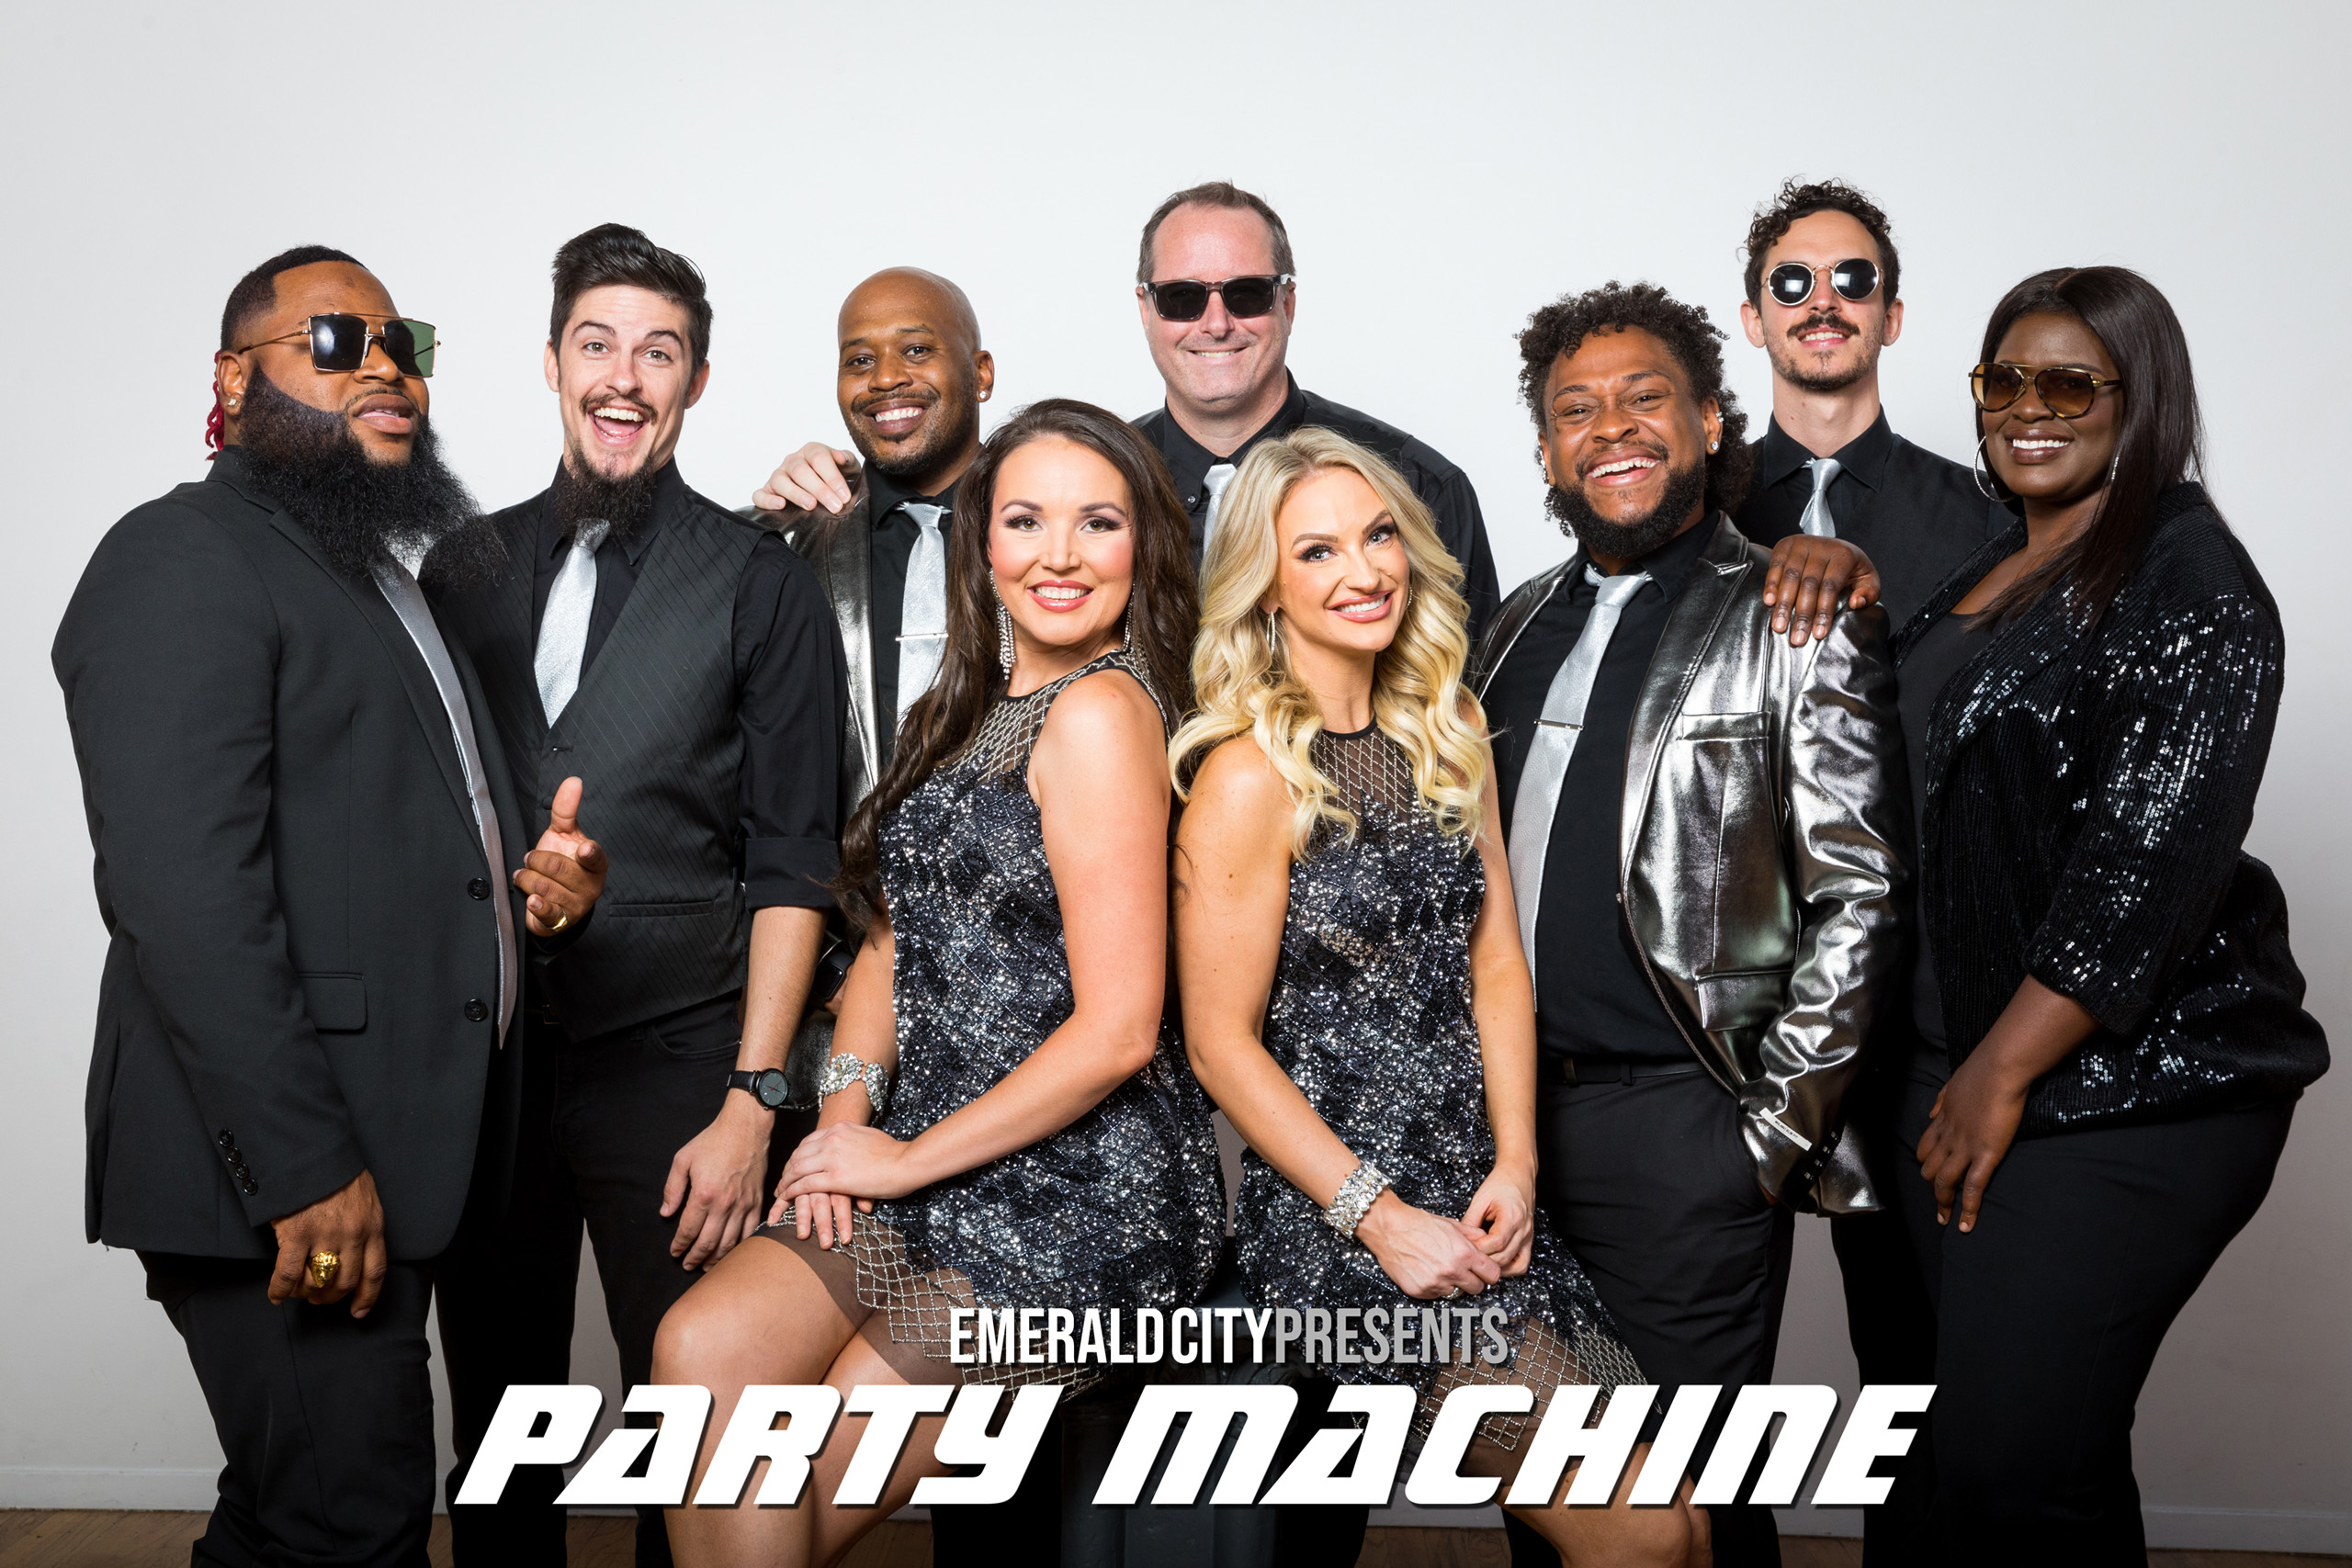 Party Machine Band - One of the Best Live Bands in the U.S. | Emerald City Bands